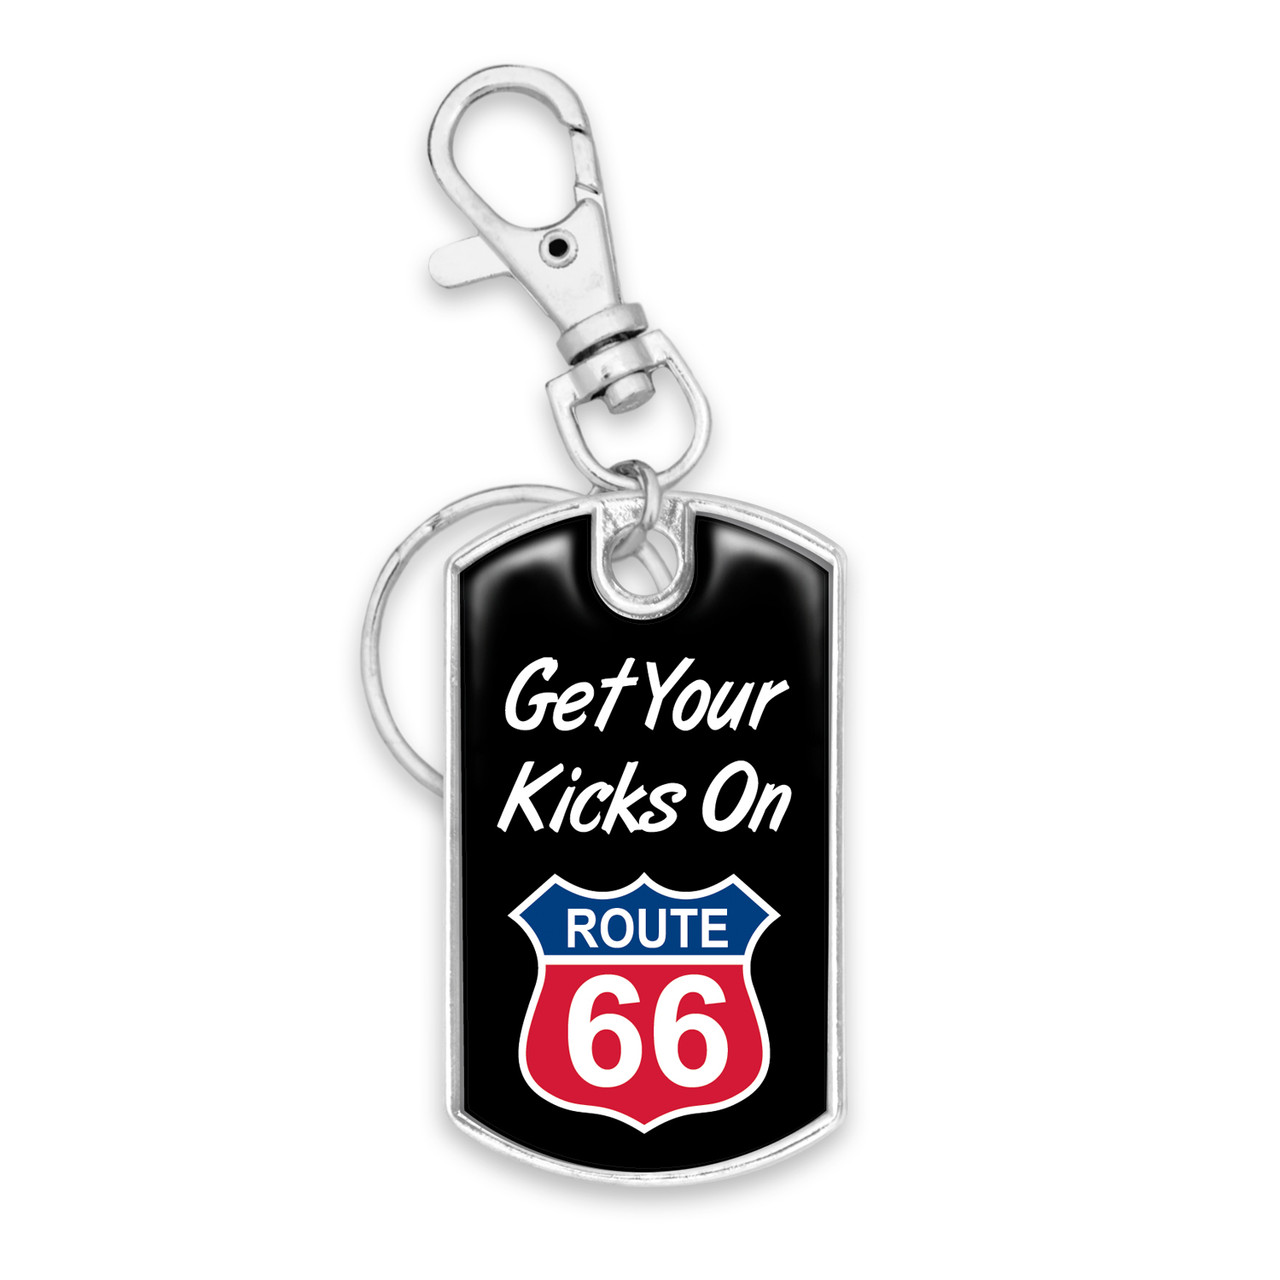 Route 66 Dogtag Keychain